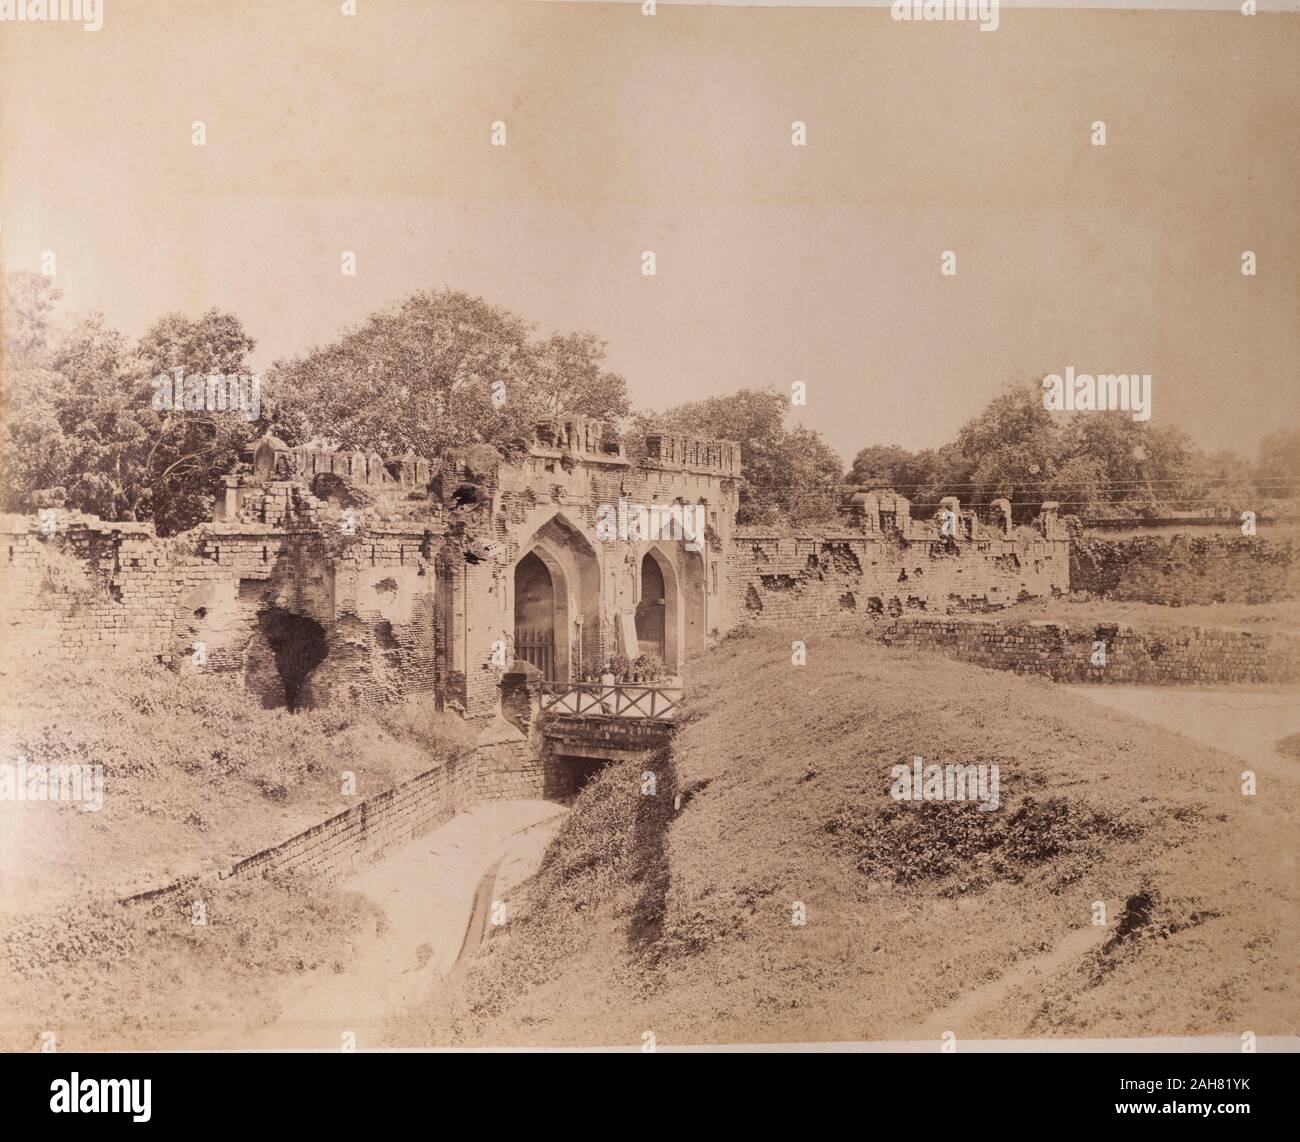 India, The crumbling arches of the Cashmere (Kashmiri) Gate, the scene of a battle between British troops and Indian sepoys during the Indian Rebellion (1857-58). Original manuscript caption: The Cashmere Gate Delhi, circa 1890. 2003/071/1/1/2/48. Stock Photo